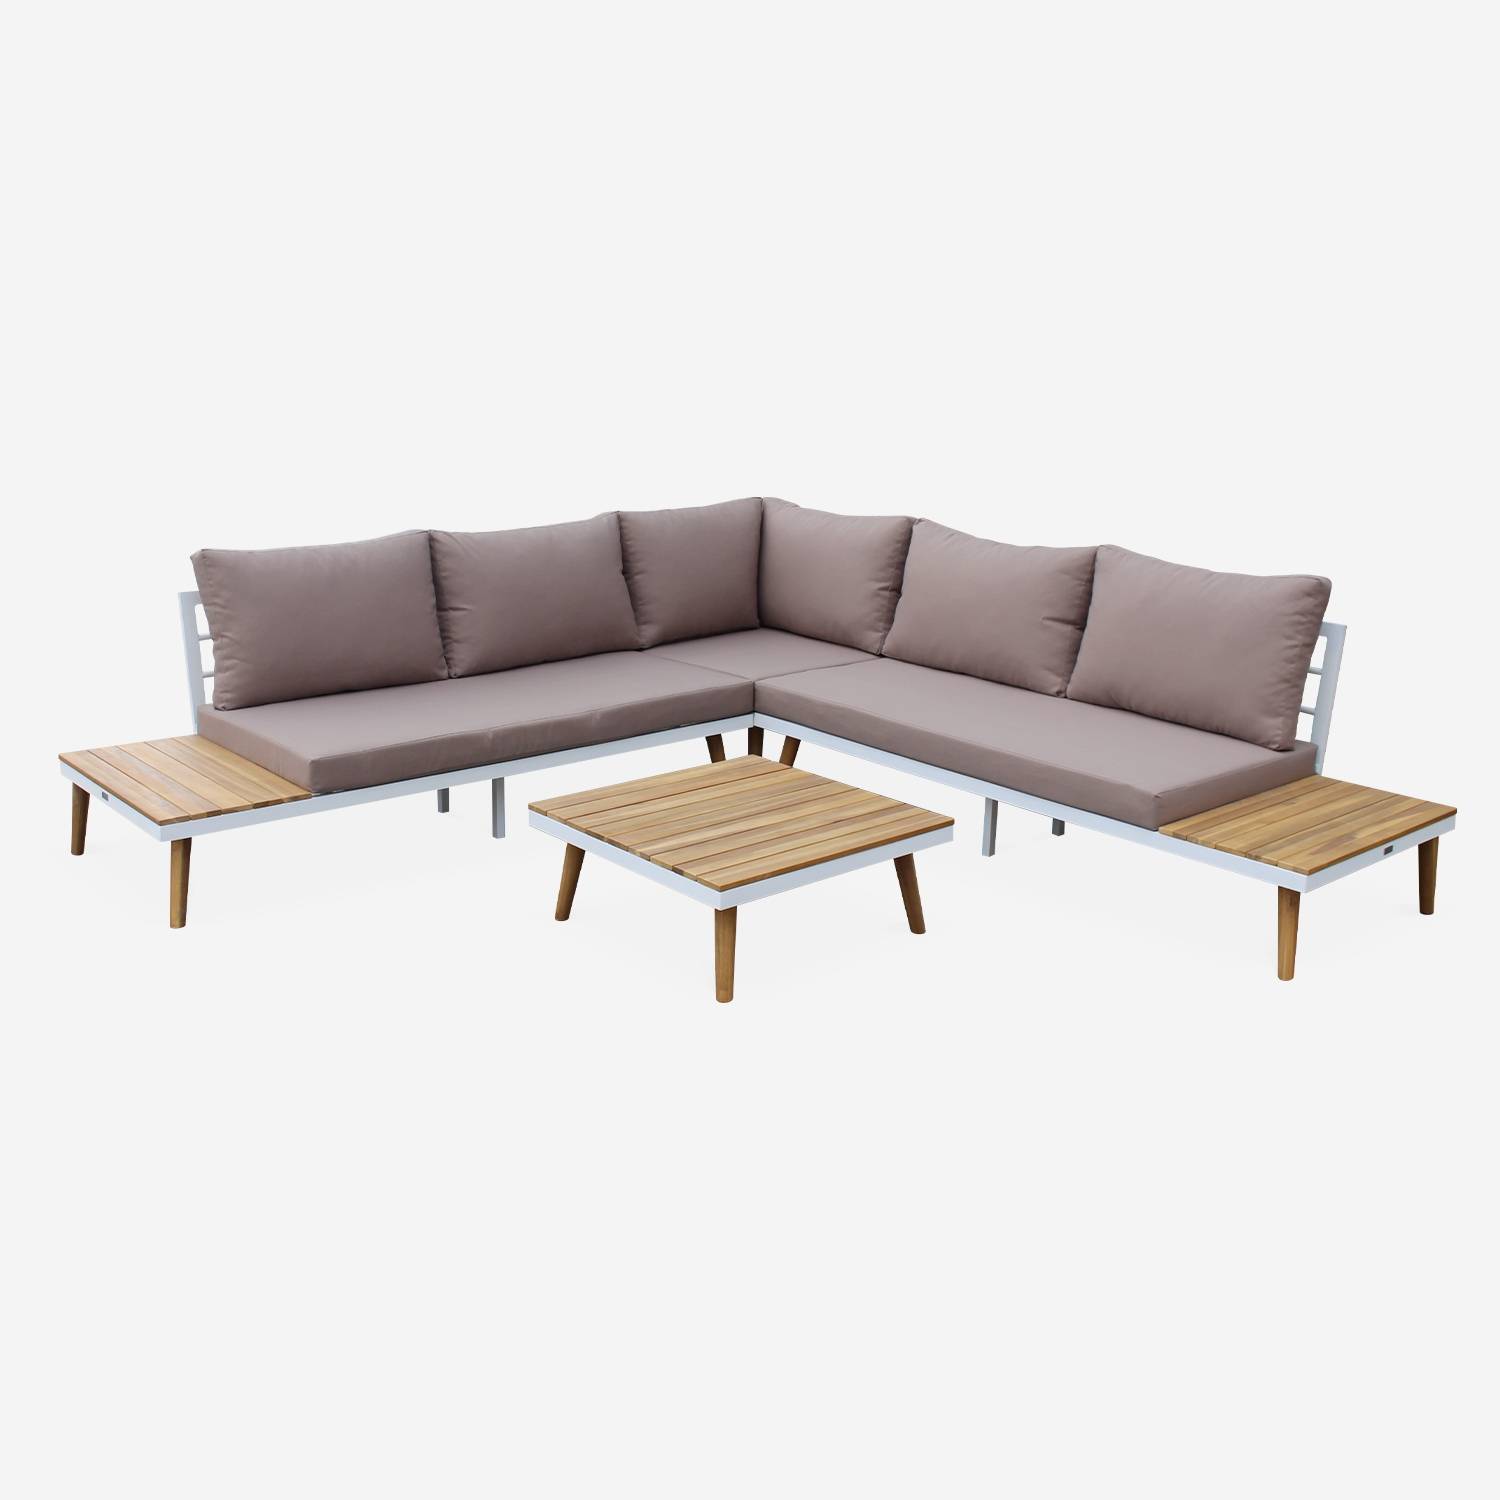 5-seater wooden outdoor sofa - corner sofa, acacia side tables and coffee table, aluminium frame, Beige-Brown | sweeek